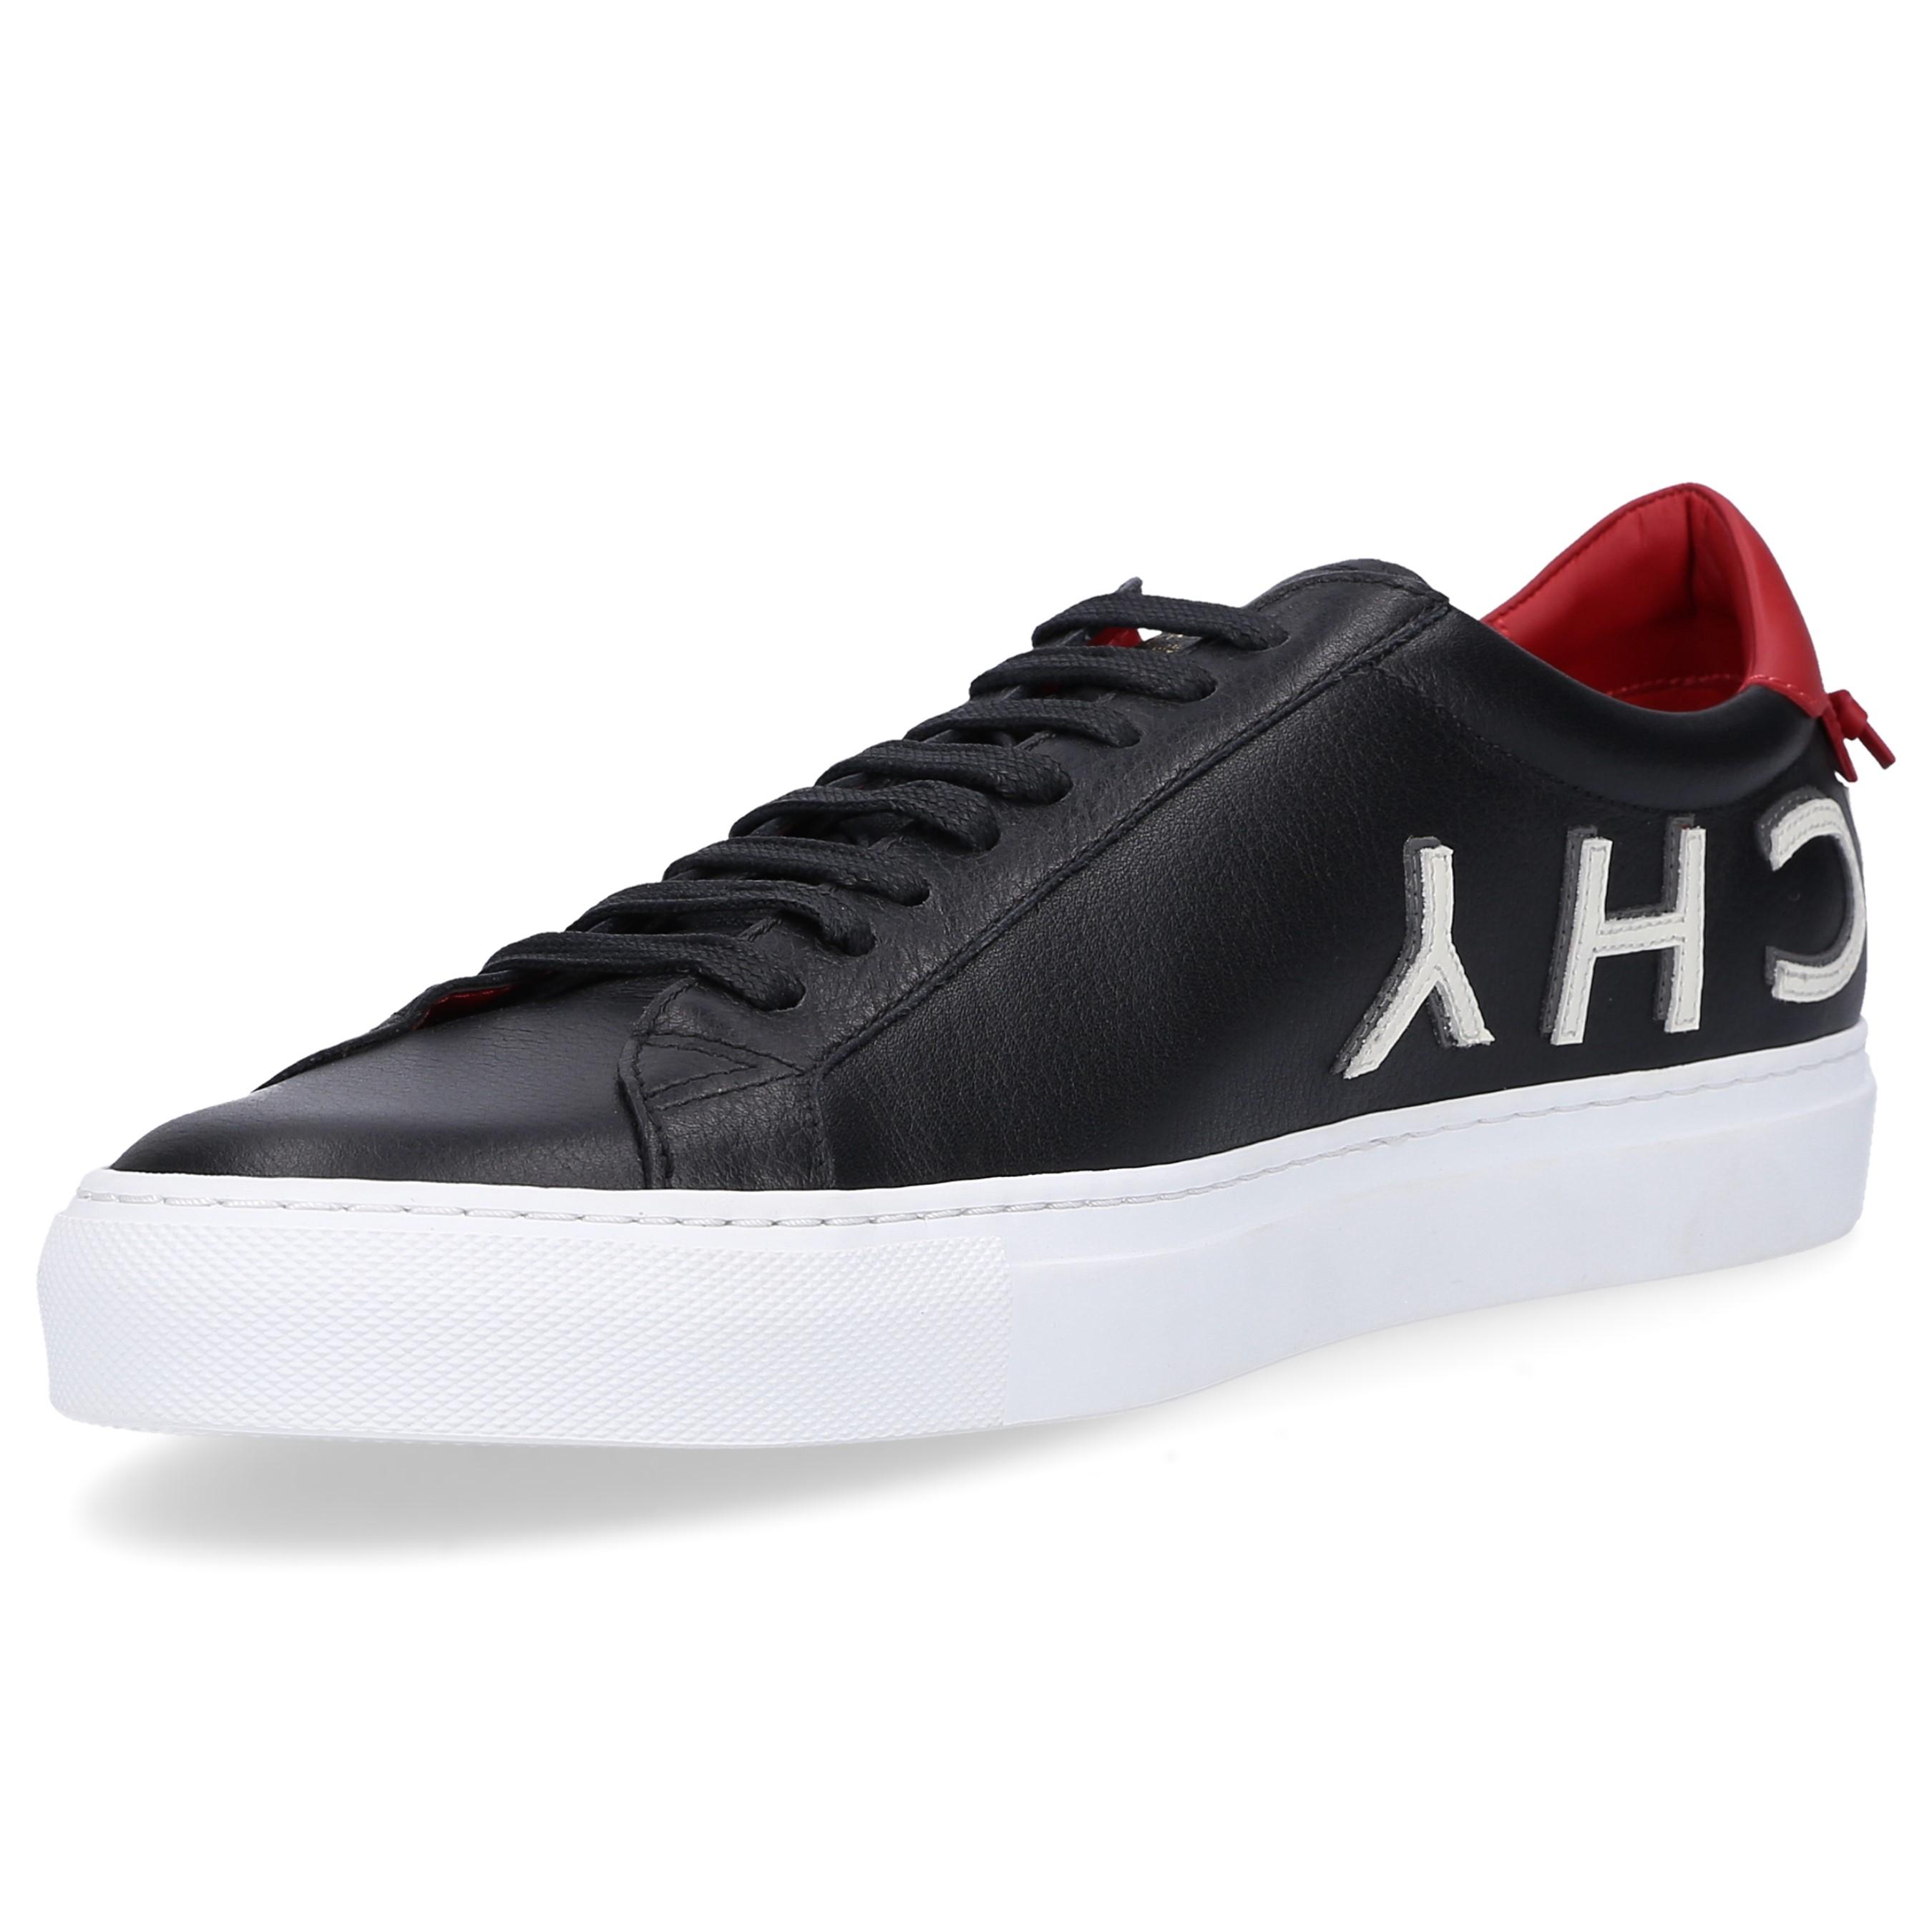 Givenchy Leather Sneakers Black Urban Street for Men - Save 55% - Lyst